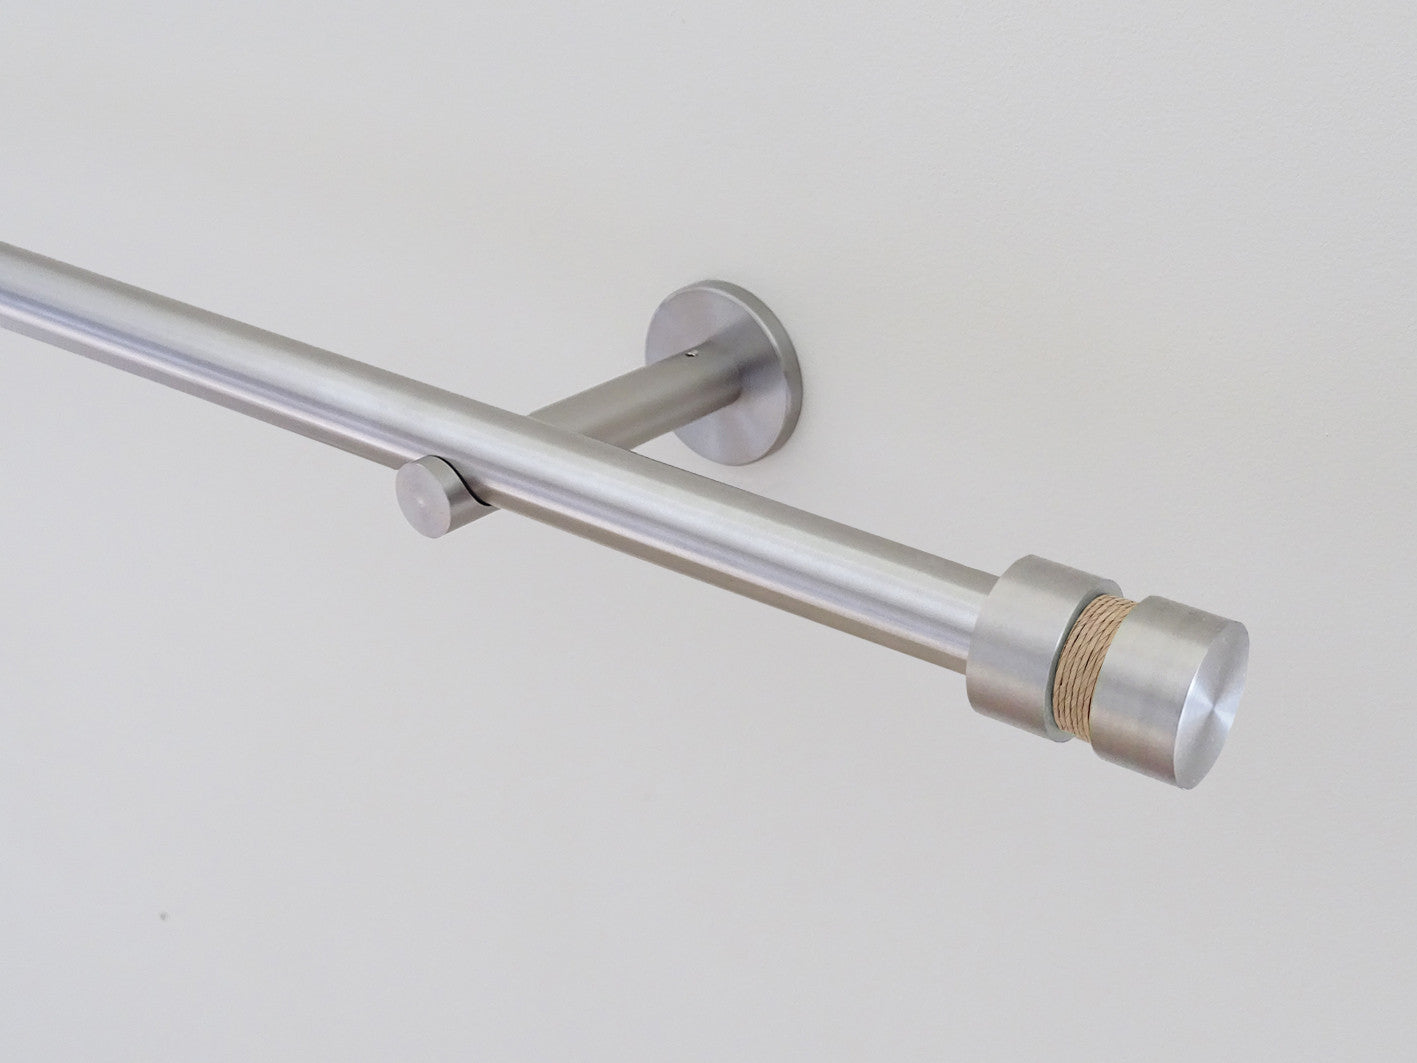 19mm diameter stainless steel metal curtain pole set with oat twine groove finials